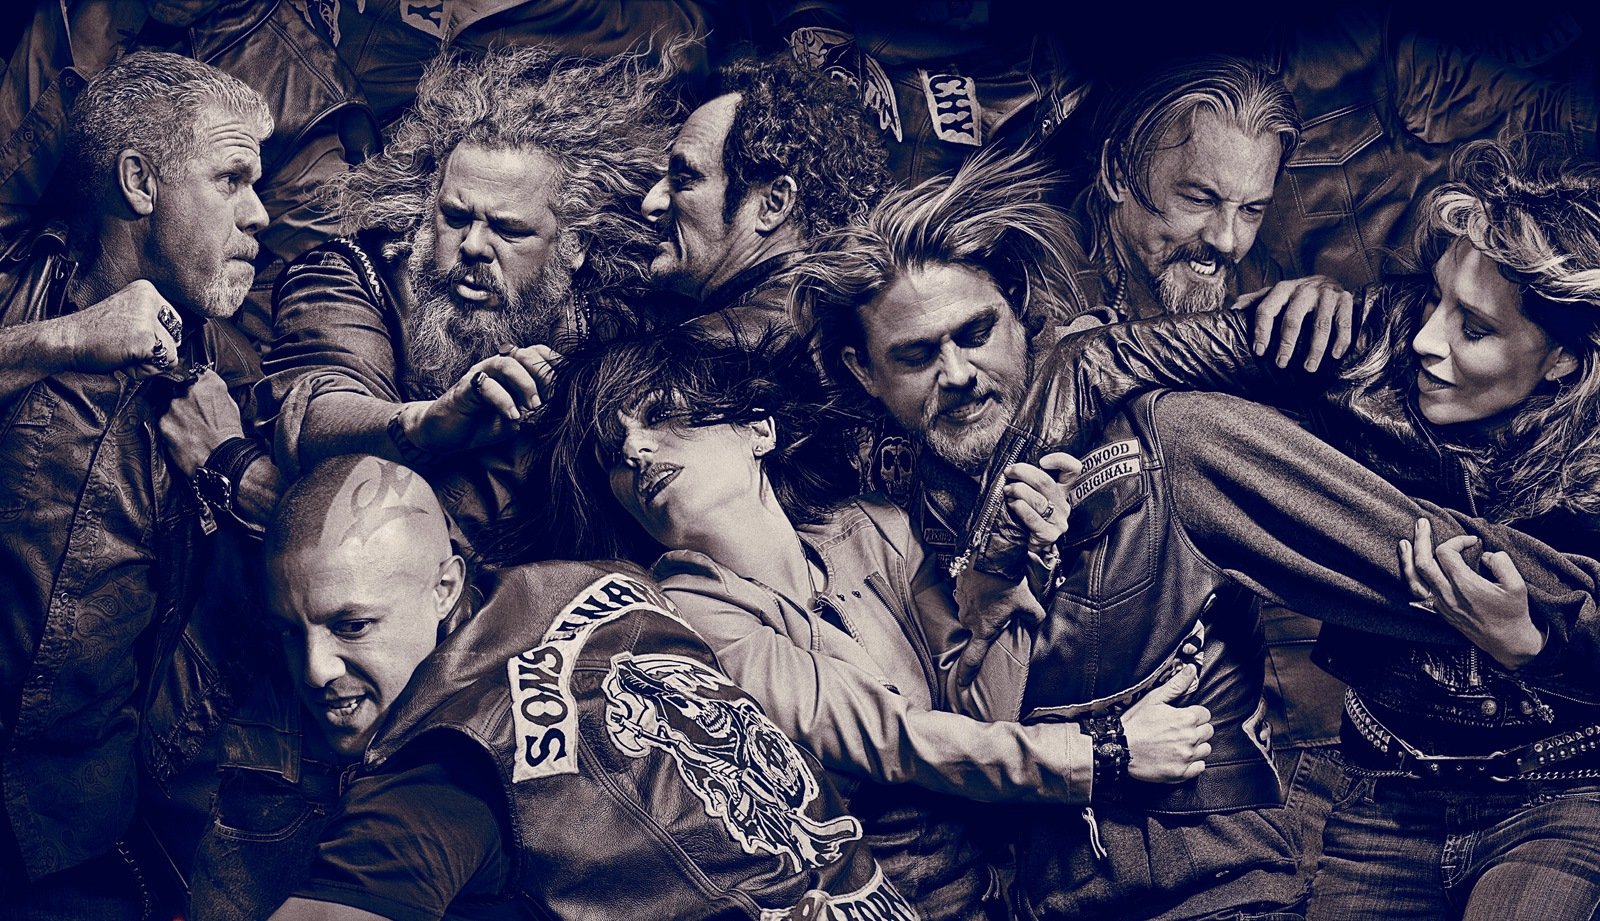 Sons of Anarchy 6